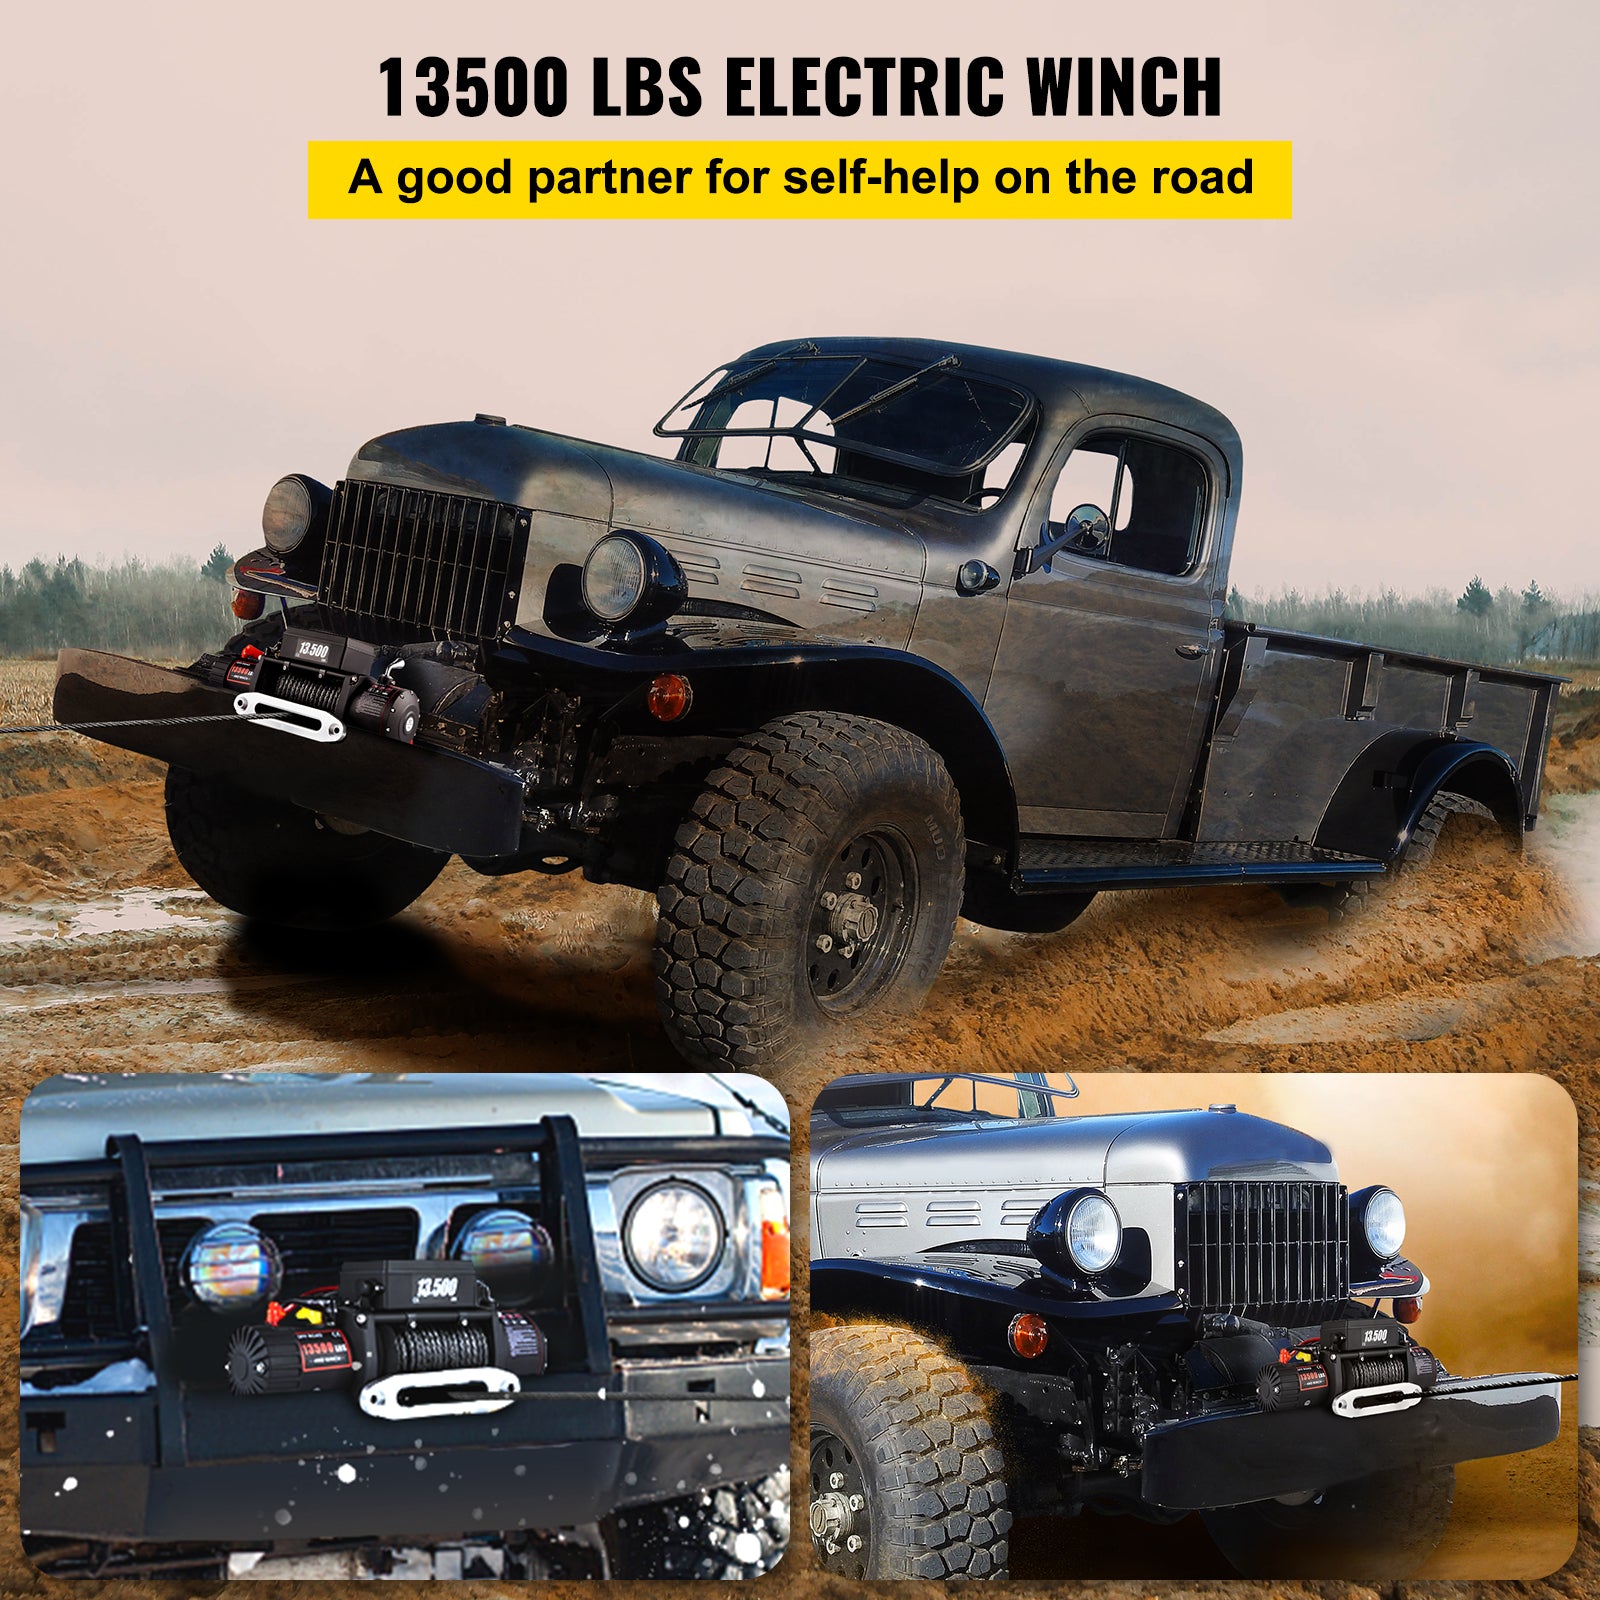 Electric Winch, 3-Stage Planetary Gear, Sliding Ring Clutch